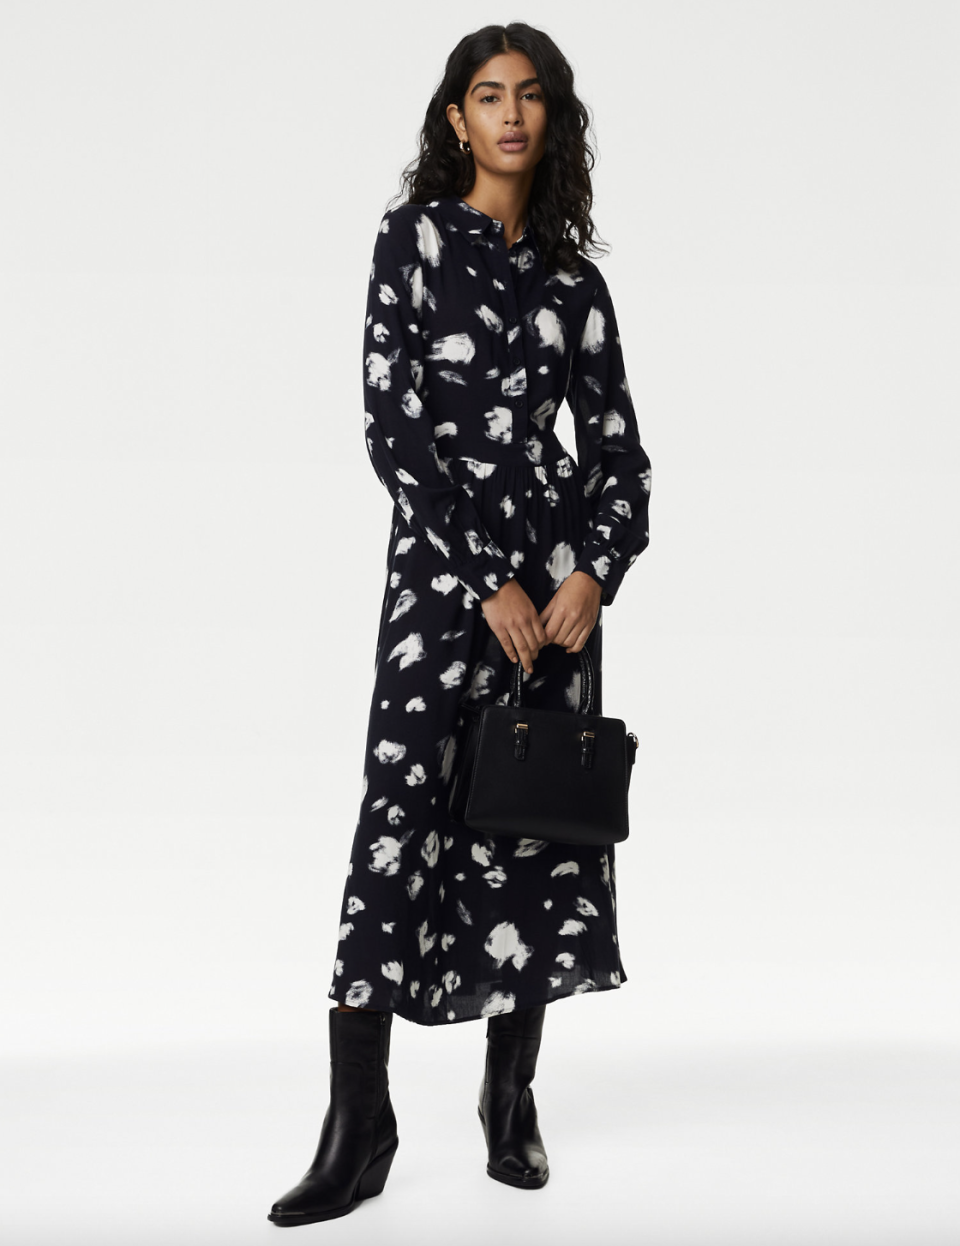 You can shop this midi shirt dress in bold and understated statement patterns. (Marks & Spencer)